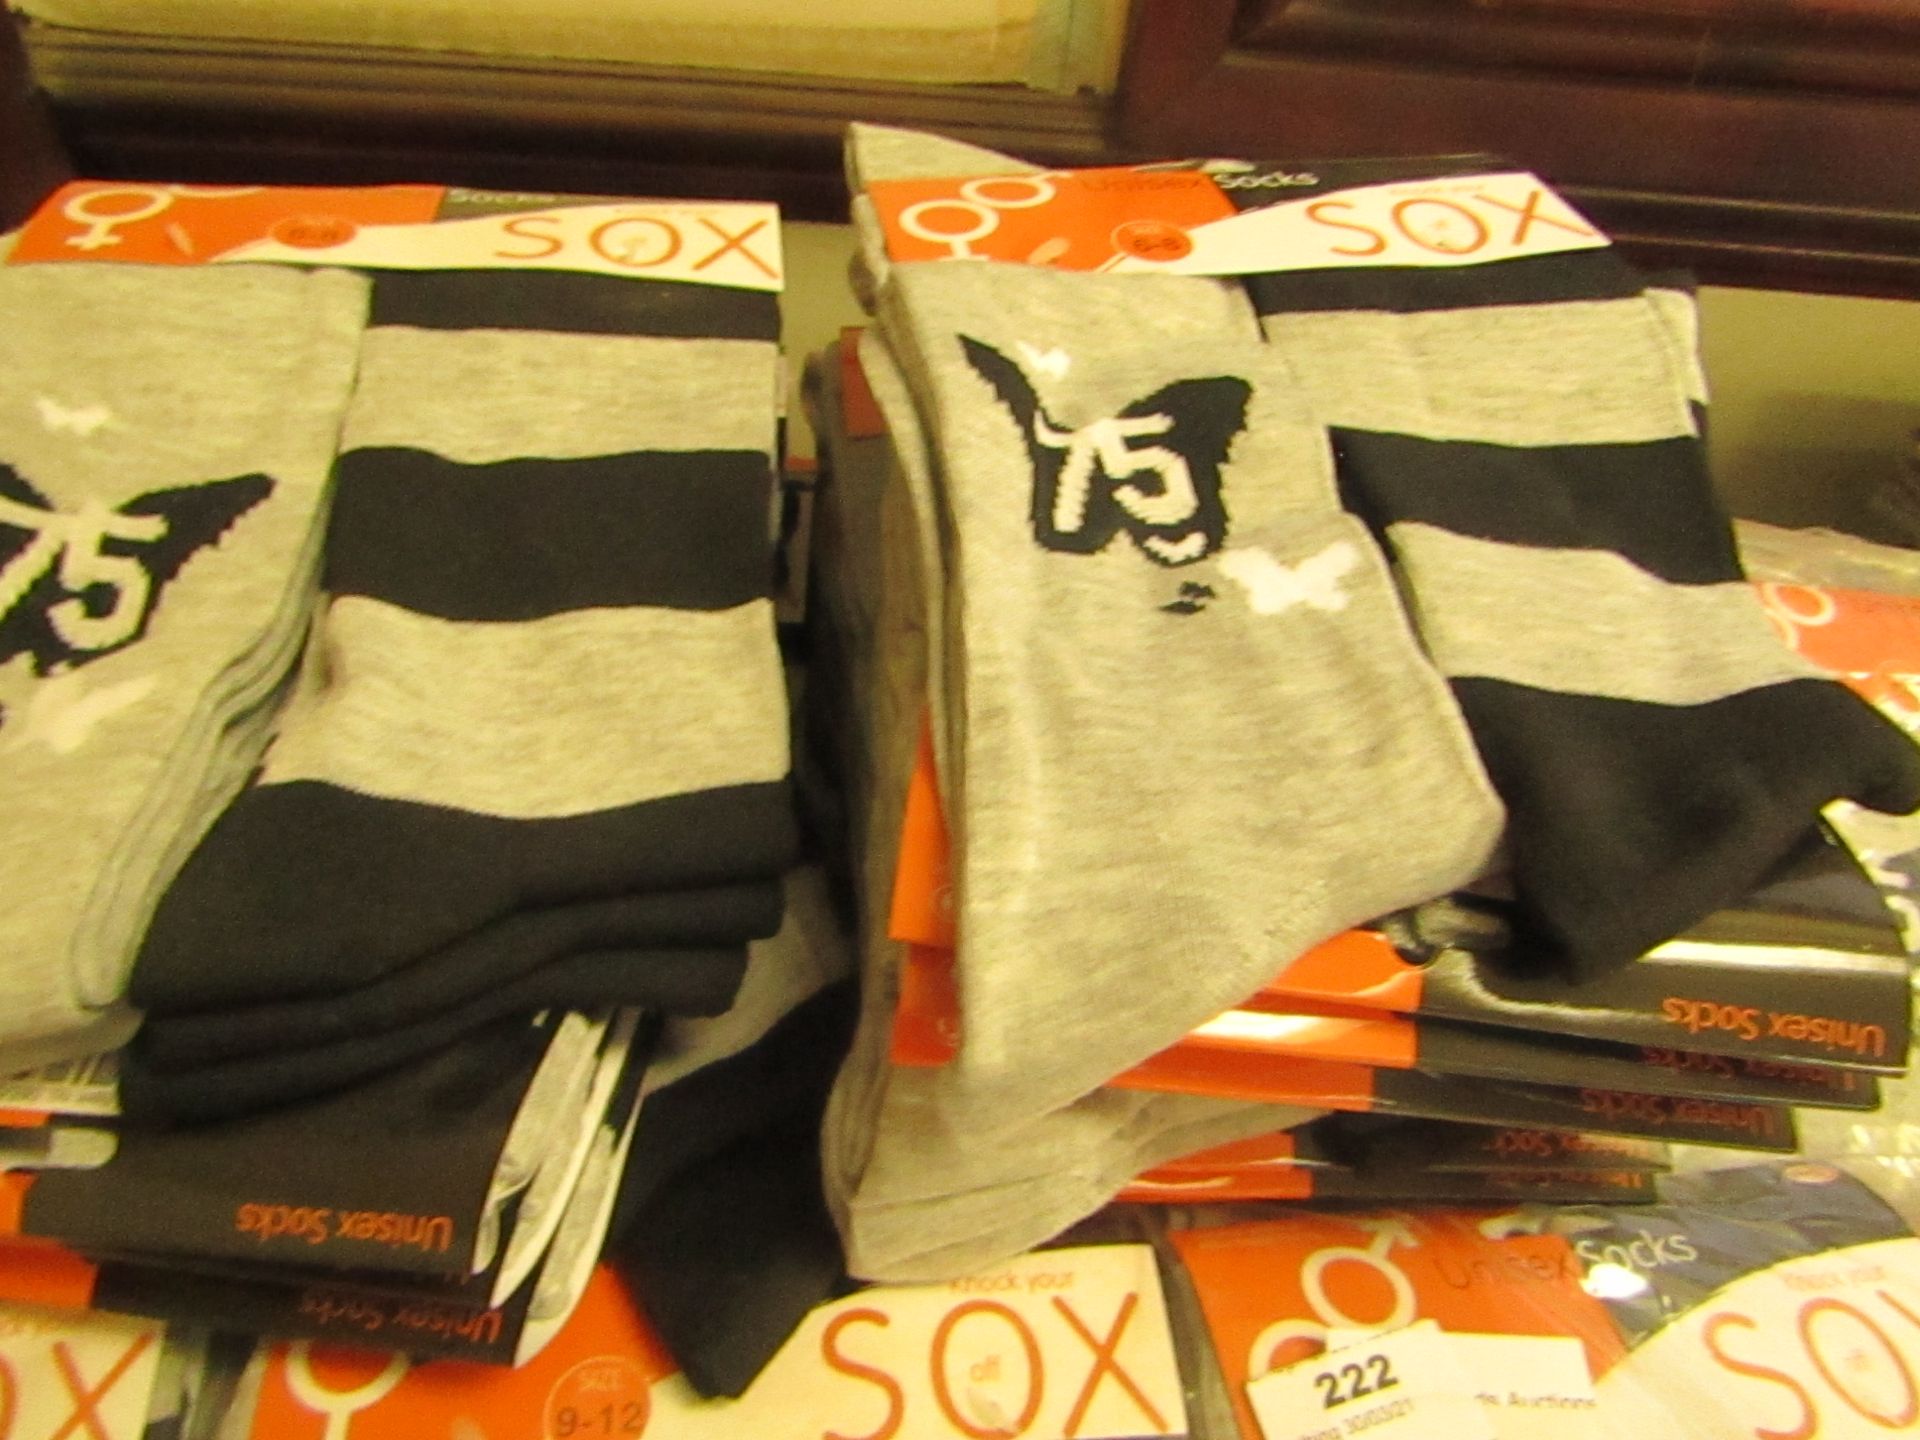 12 X Pairs of Adult Unisex Socks Size 9-12New in Packaging